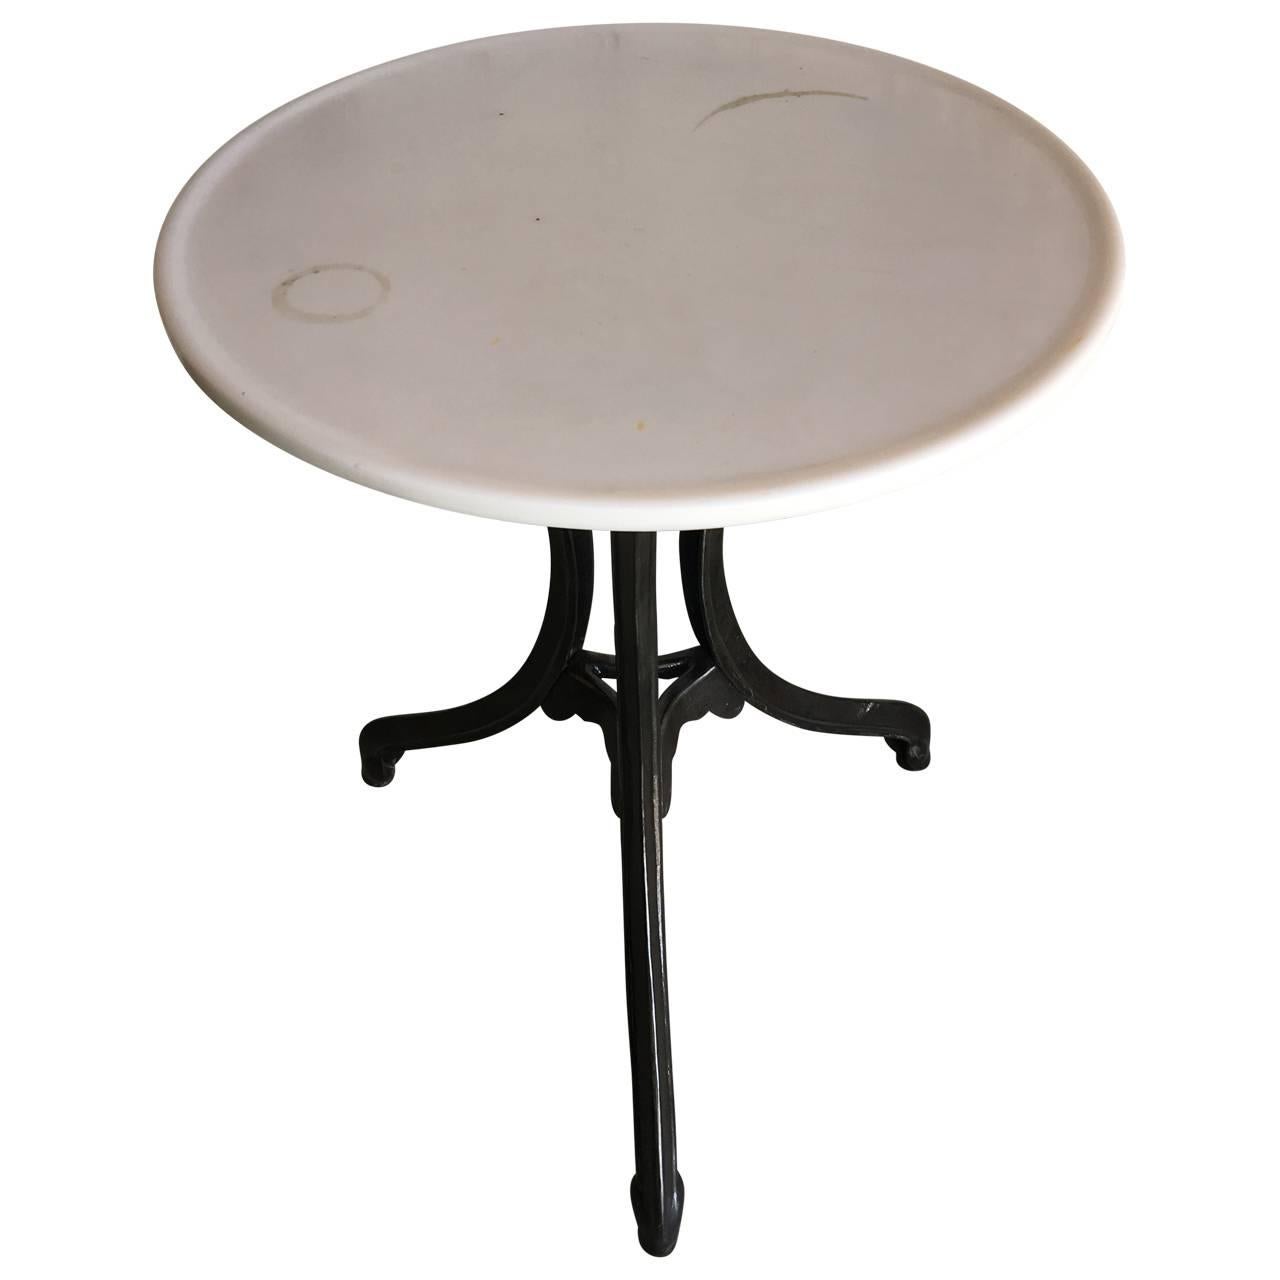 Bistro cast iron cafe table with rare Vitrolite tabletop. 
Vitrolite was an opaque pigmented glass manufactured by Pilkington Brothers in the United Kingdom. It was made by The Vitrolite Company (1908–1935) and Libbey-Owens-Ford (1935–1947) in the